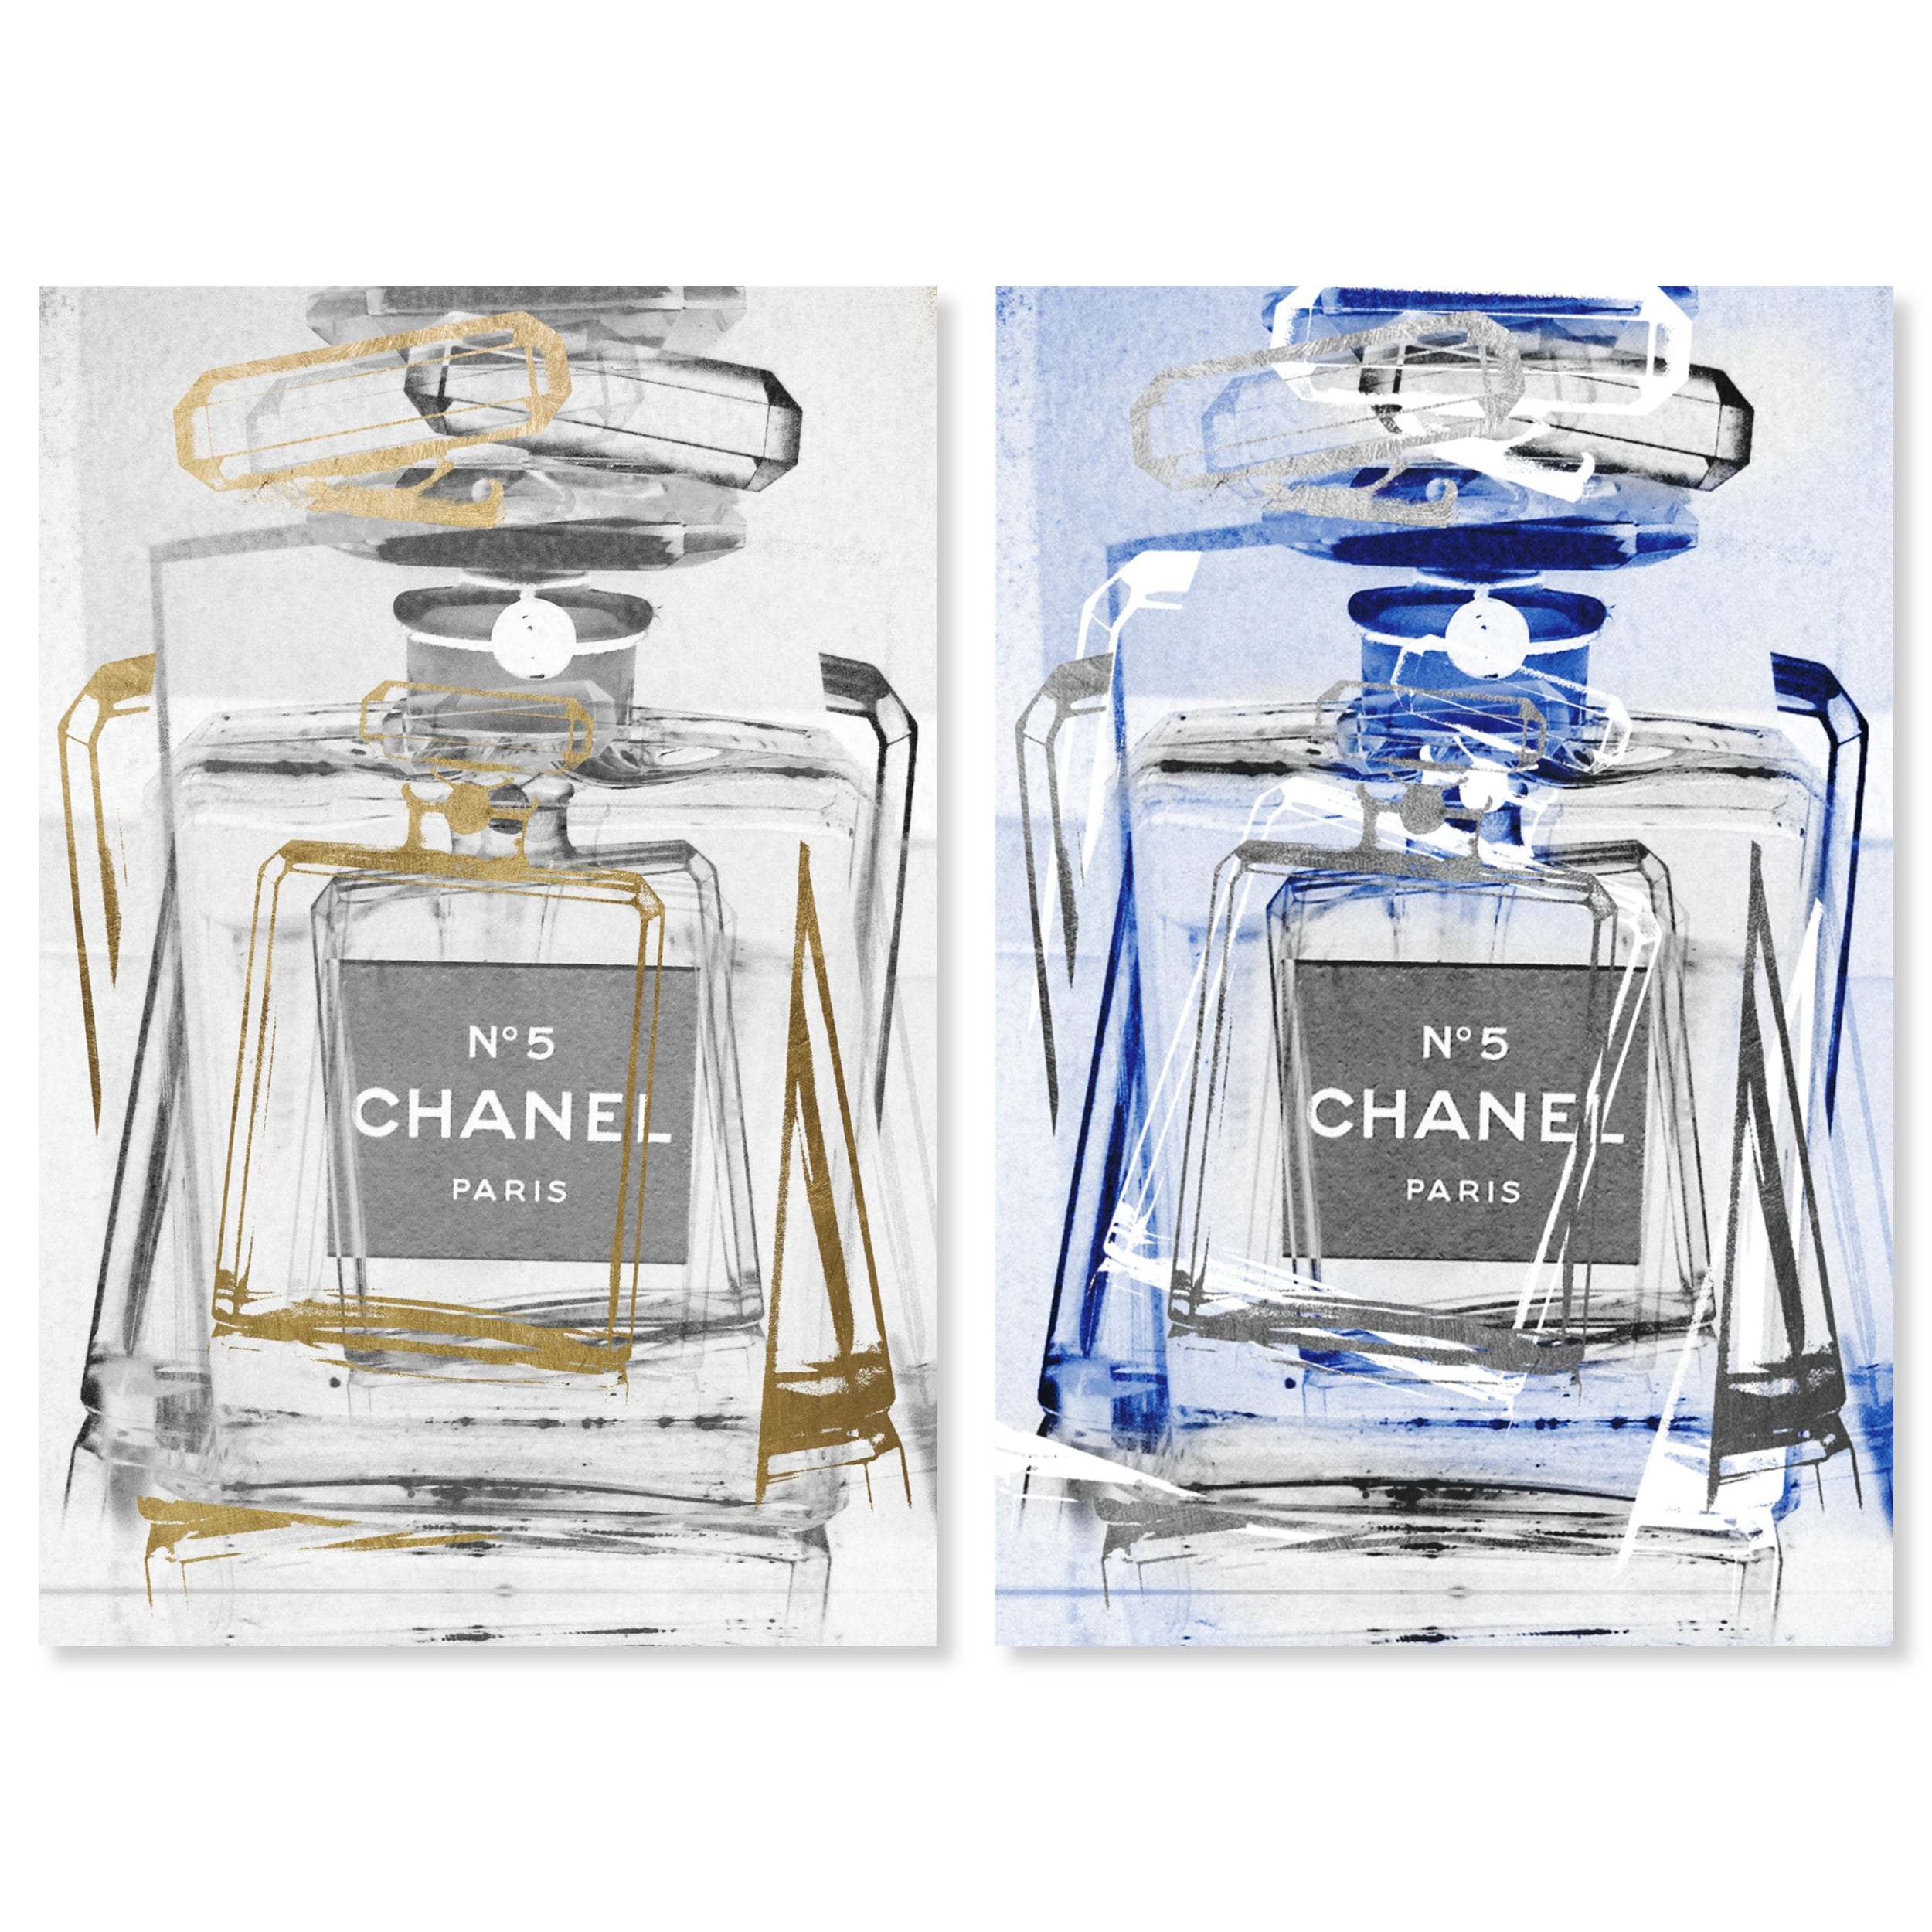 Fashion and Glam 'Perfume Shades' Perfumes by Oliver Gal Wall Art Print -  On Sale - Bed Bath & Beyond - 35055241